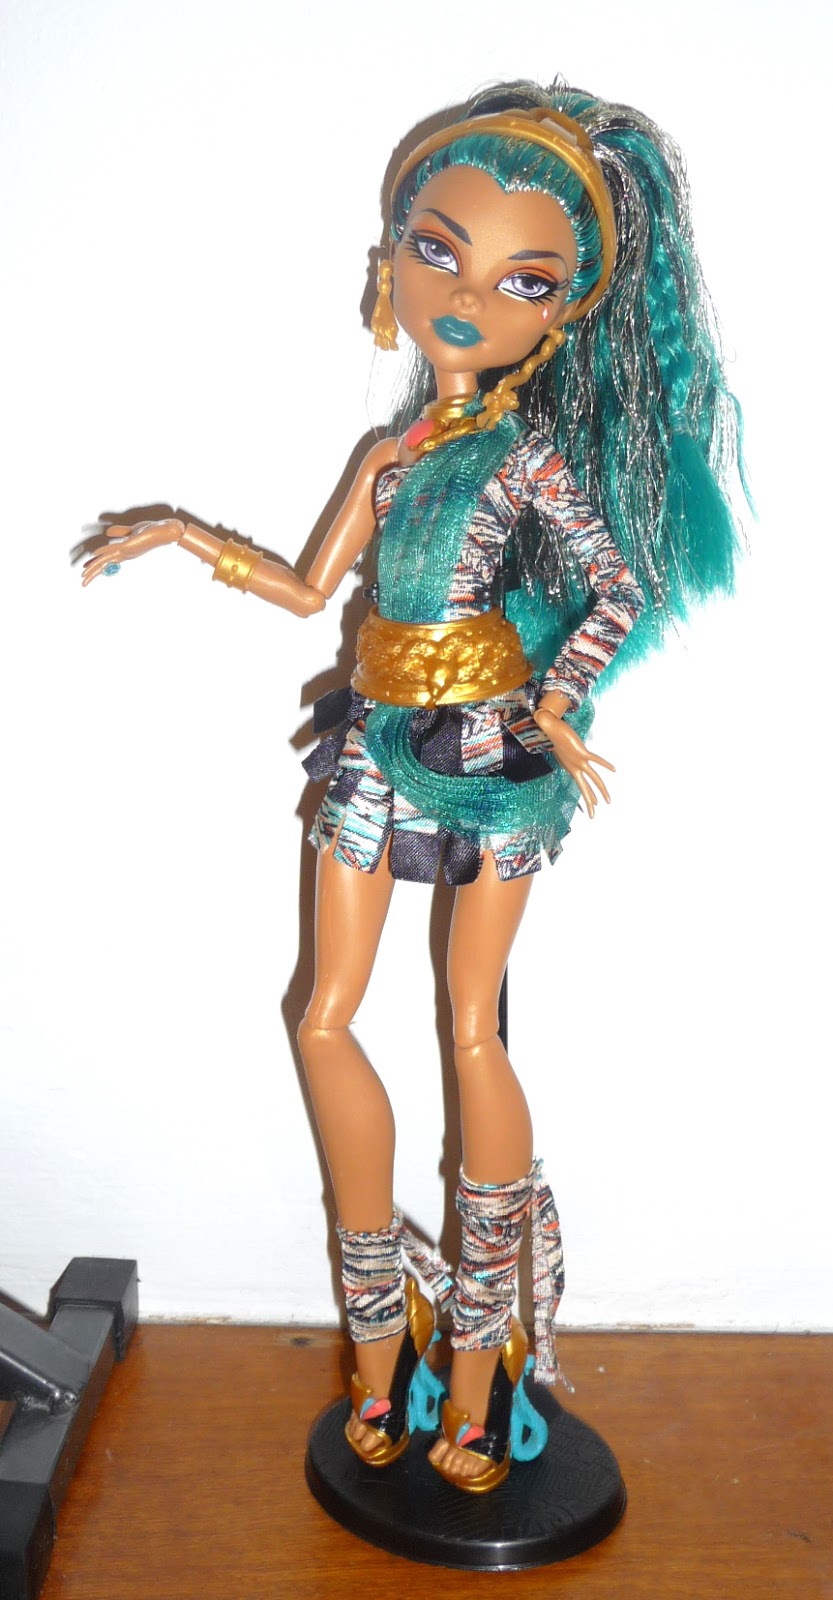 Monkfish's dolly ramble: Monster High - Clawdeen - A retrospective